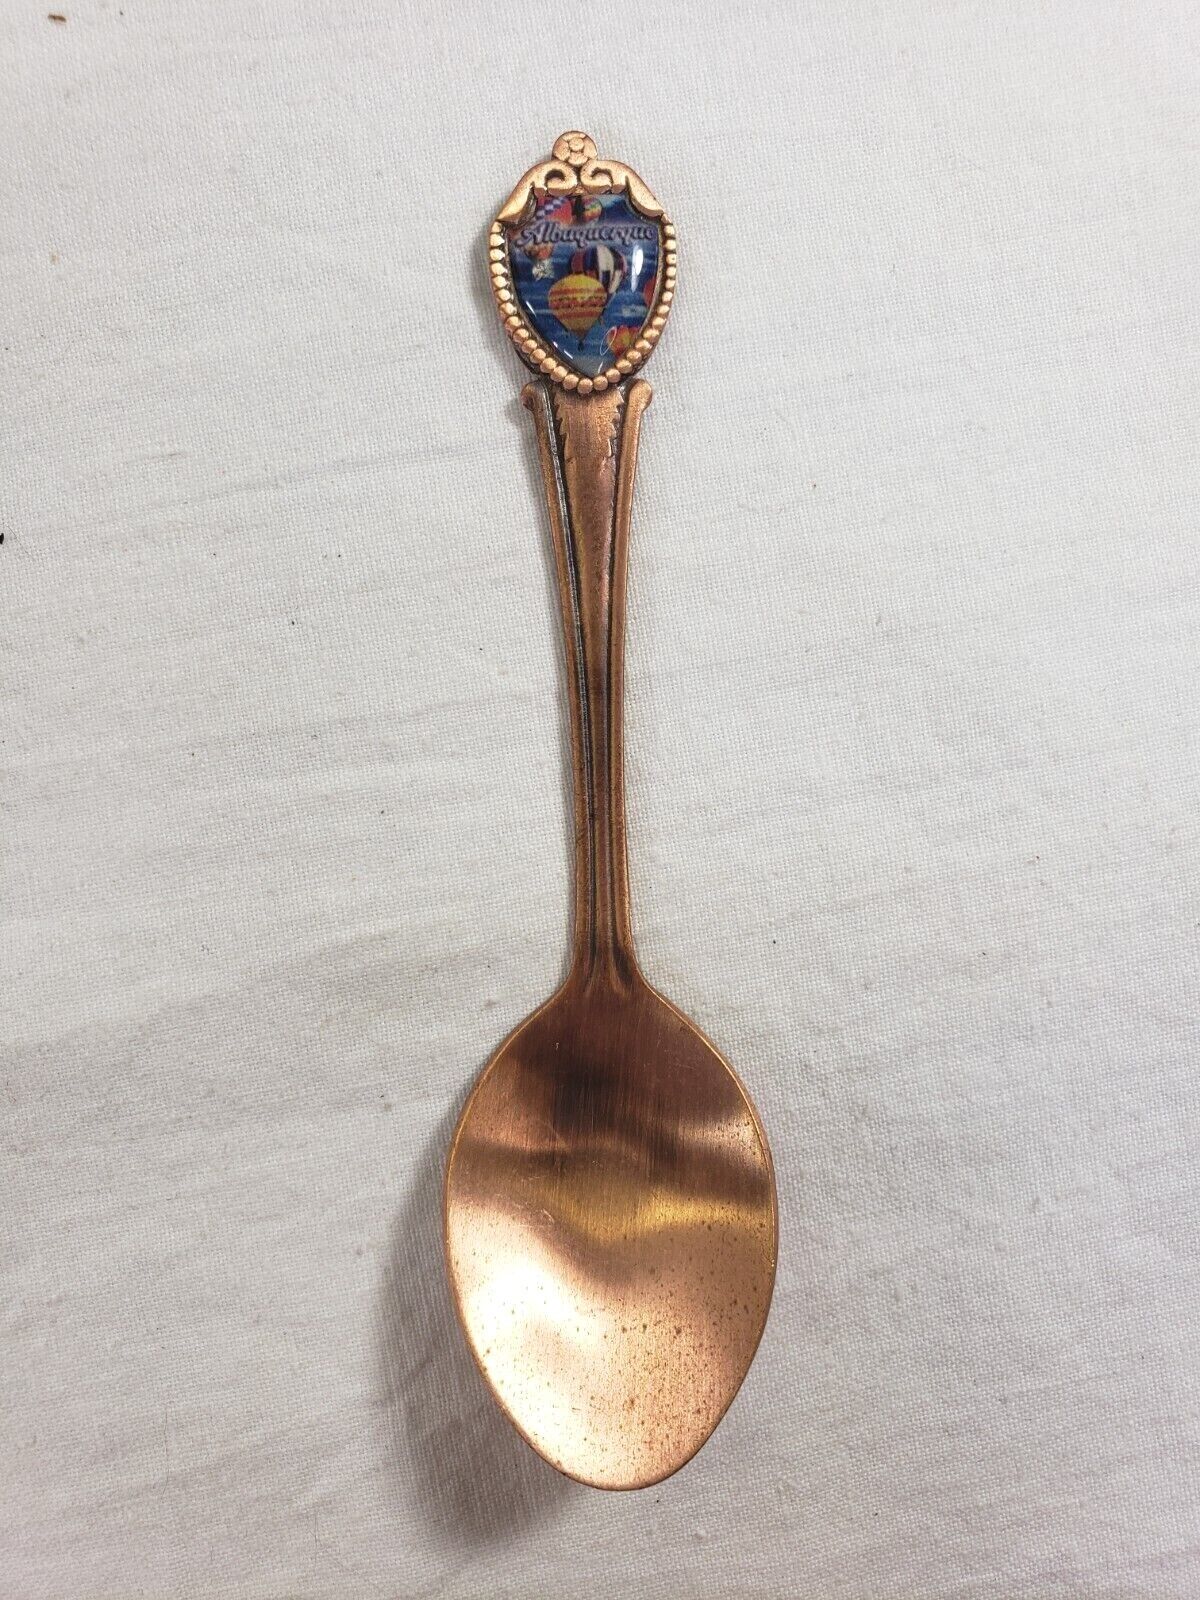 Vintage Collectible Spoons From Estate Sale Lot You Pick Many to Choose From